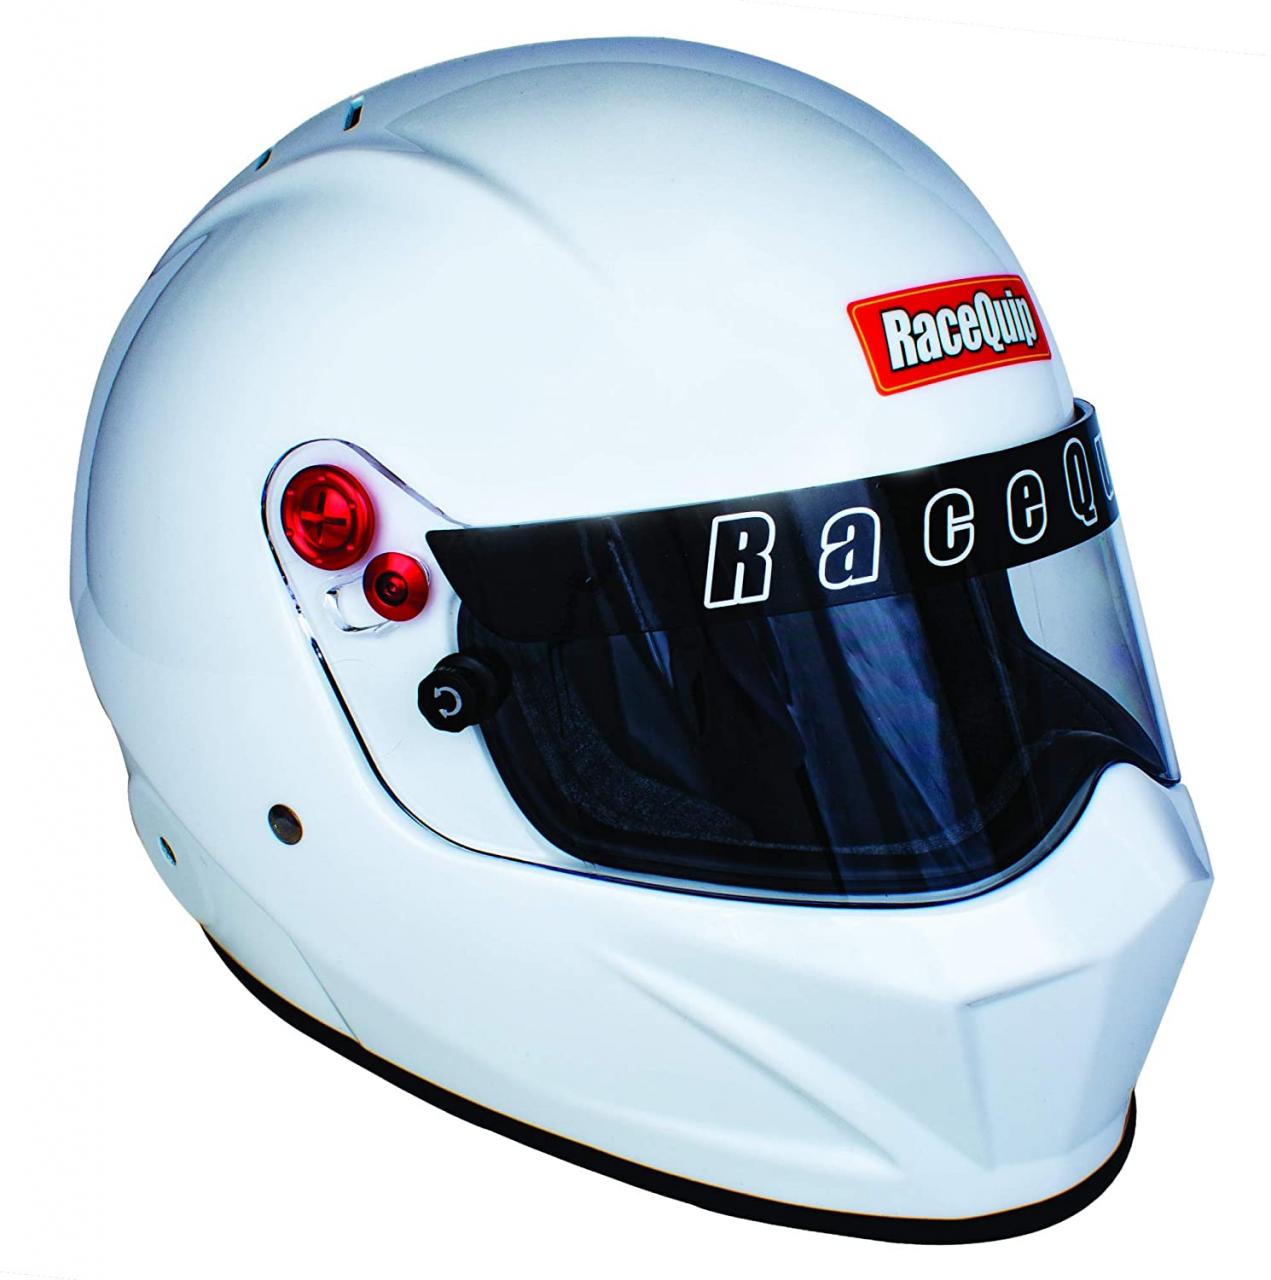 Buy RaceQuip Full Face Helmet PRO20 Series Snell SA2020 Rated America  Graphic X-Large 276126 Online in Hong Kong. B08DL7ZWL4